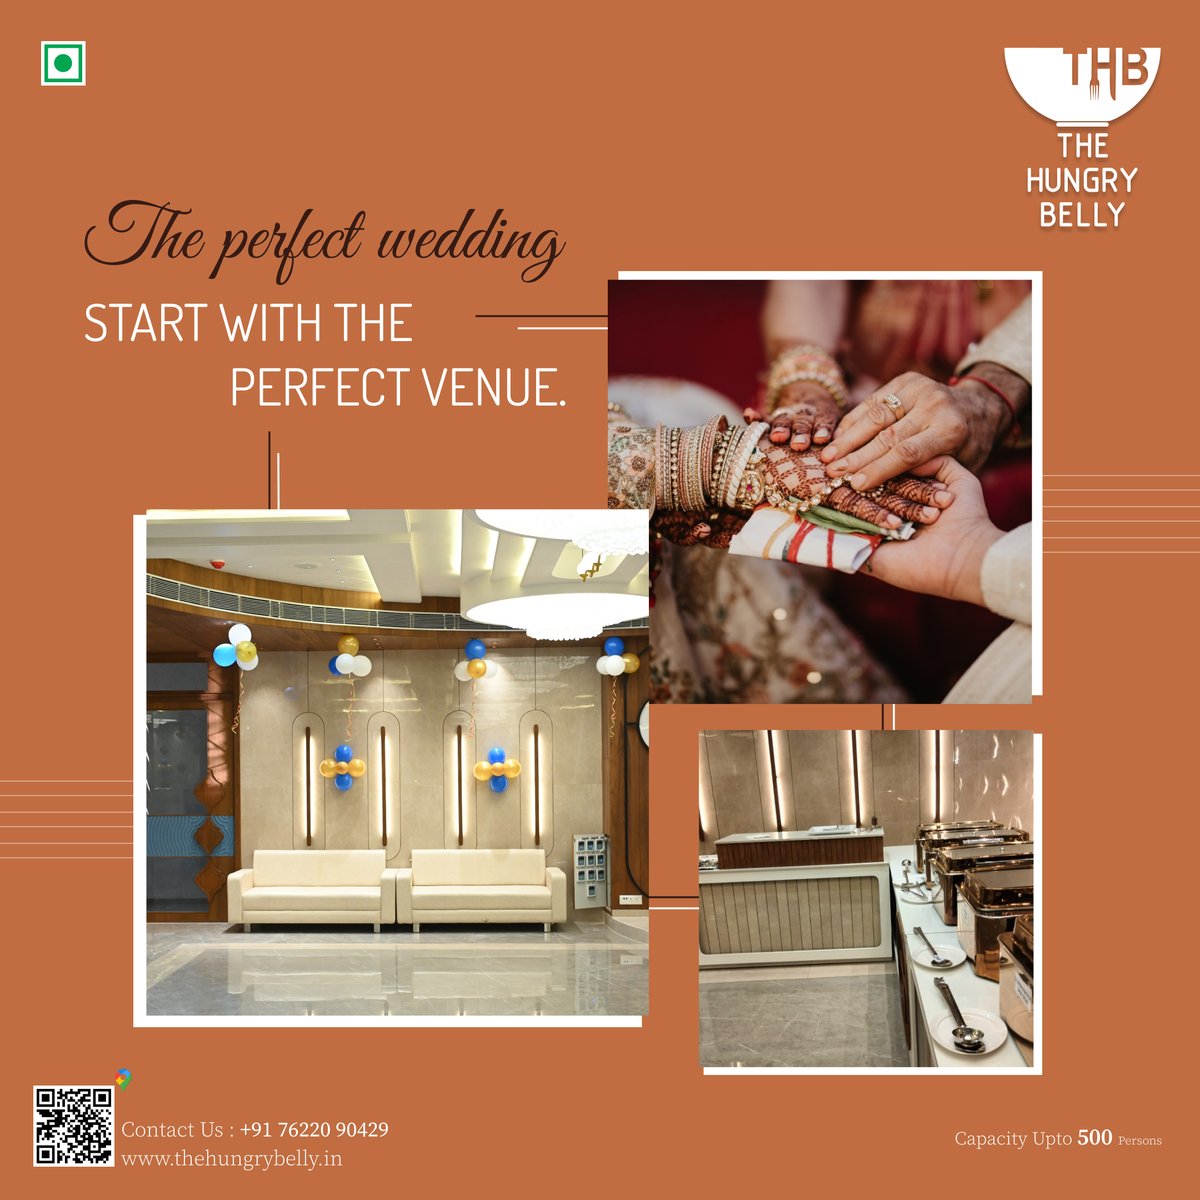 The Perfect Wedding Start With The Perfect Venue.

#hungrybelly #hungry #belly #radhanpur #restaurant #banquet #punjabifood #chinesfood #familyrestaurant #foodblogger #foodie #banquet #banquethall #marriagehall #birthdayhall #partyhall